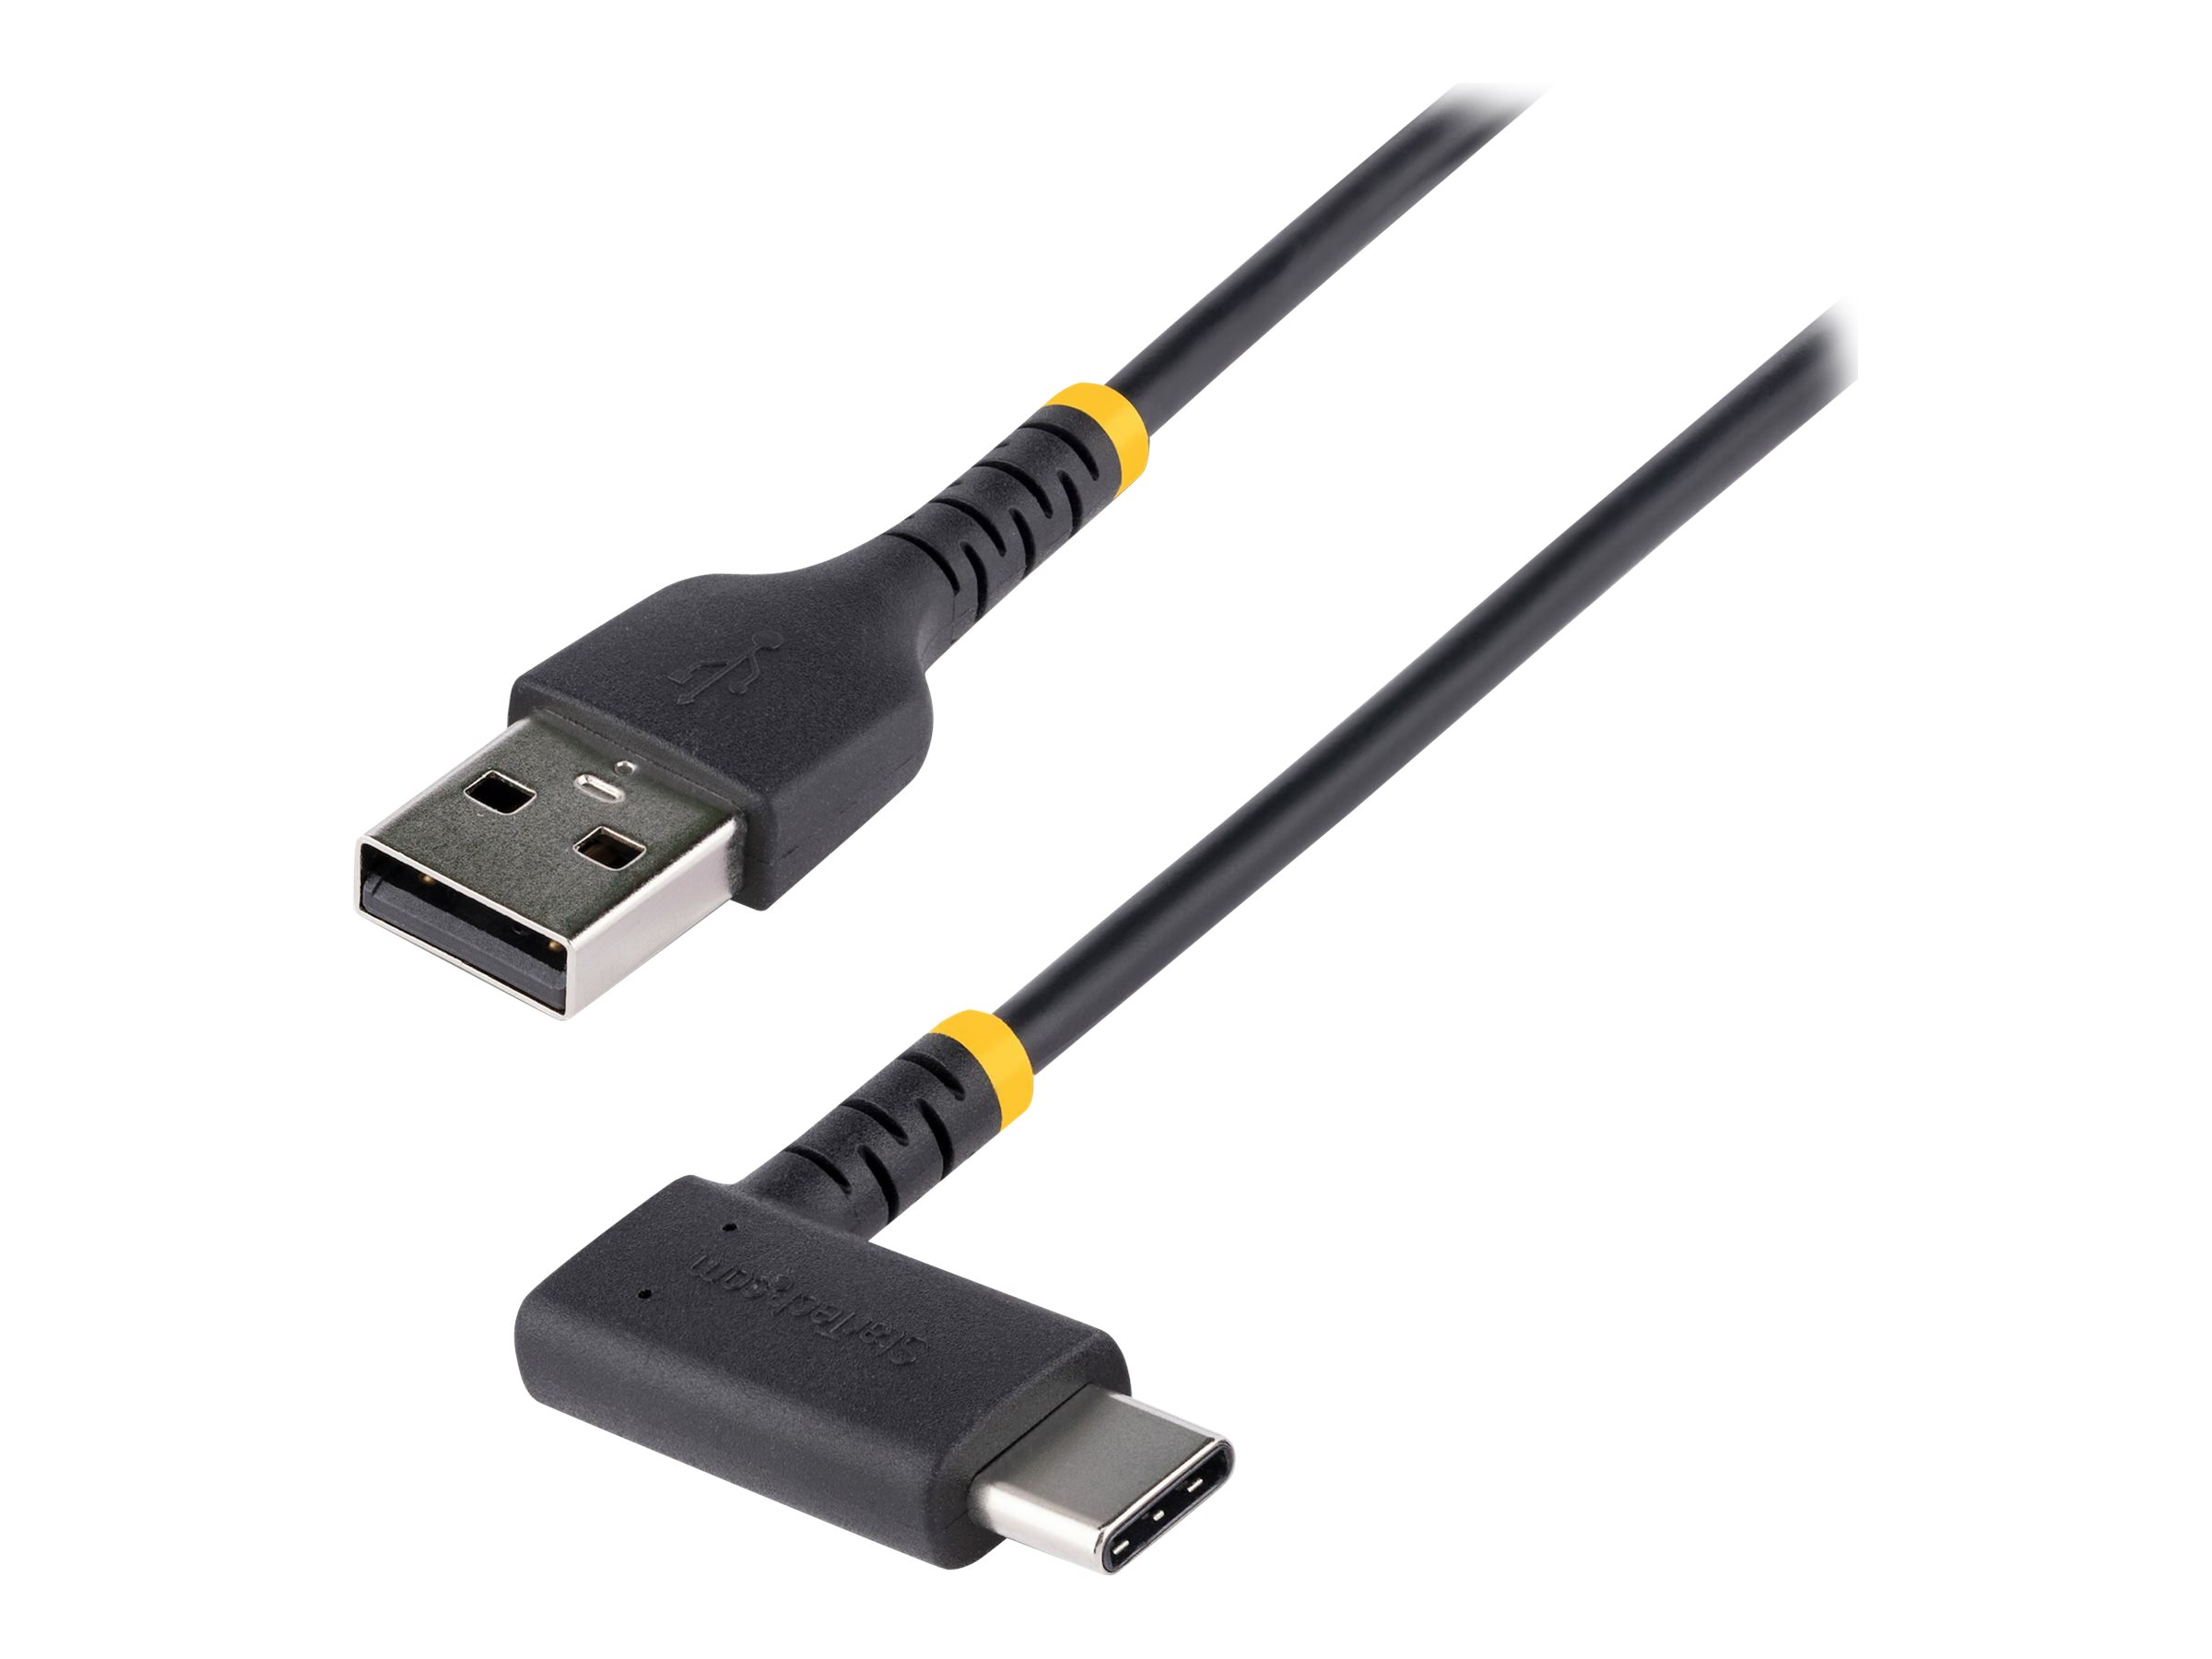 StarTech.com 6ft (2m) USB A to C Charging Cable Right Angle, Heavy Duty Fast Charge USB-C Cable, USB 2.0 A to Type-C, Durable and Rugged Aramid Fiber, 3A, S20/iPad/Pixel - High Quality USB Charging Cord (R2ACR-2M-USB-CABLE) - Câble USB - USB (M) droit pour 24 pin USB-C (M) angle droit - Thunderbolt 3 / USB 2.0 - 3 A - 2 m - USB Power Delivery (60W) - noir - R2ACR-2M-USB-CABLE - Câbles USB